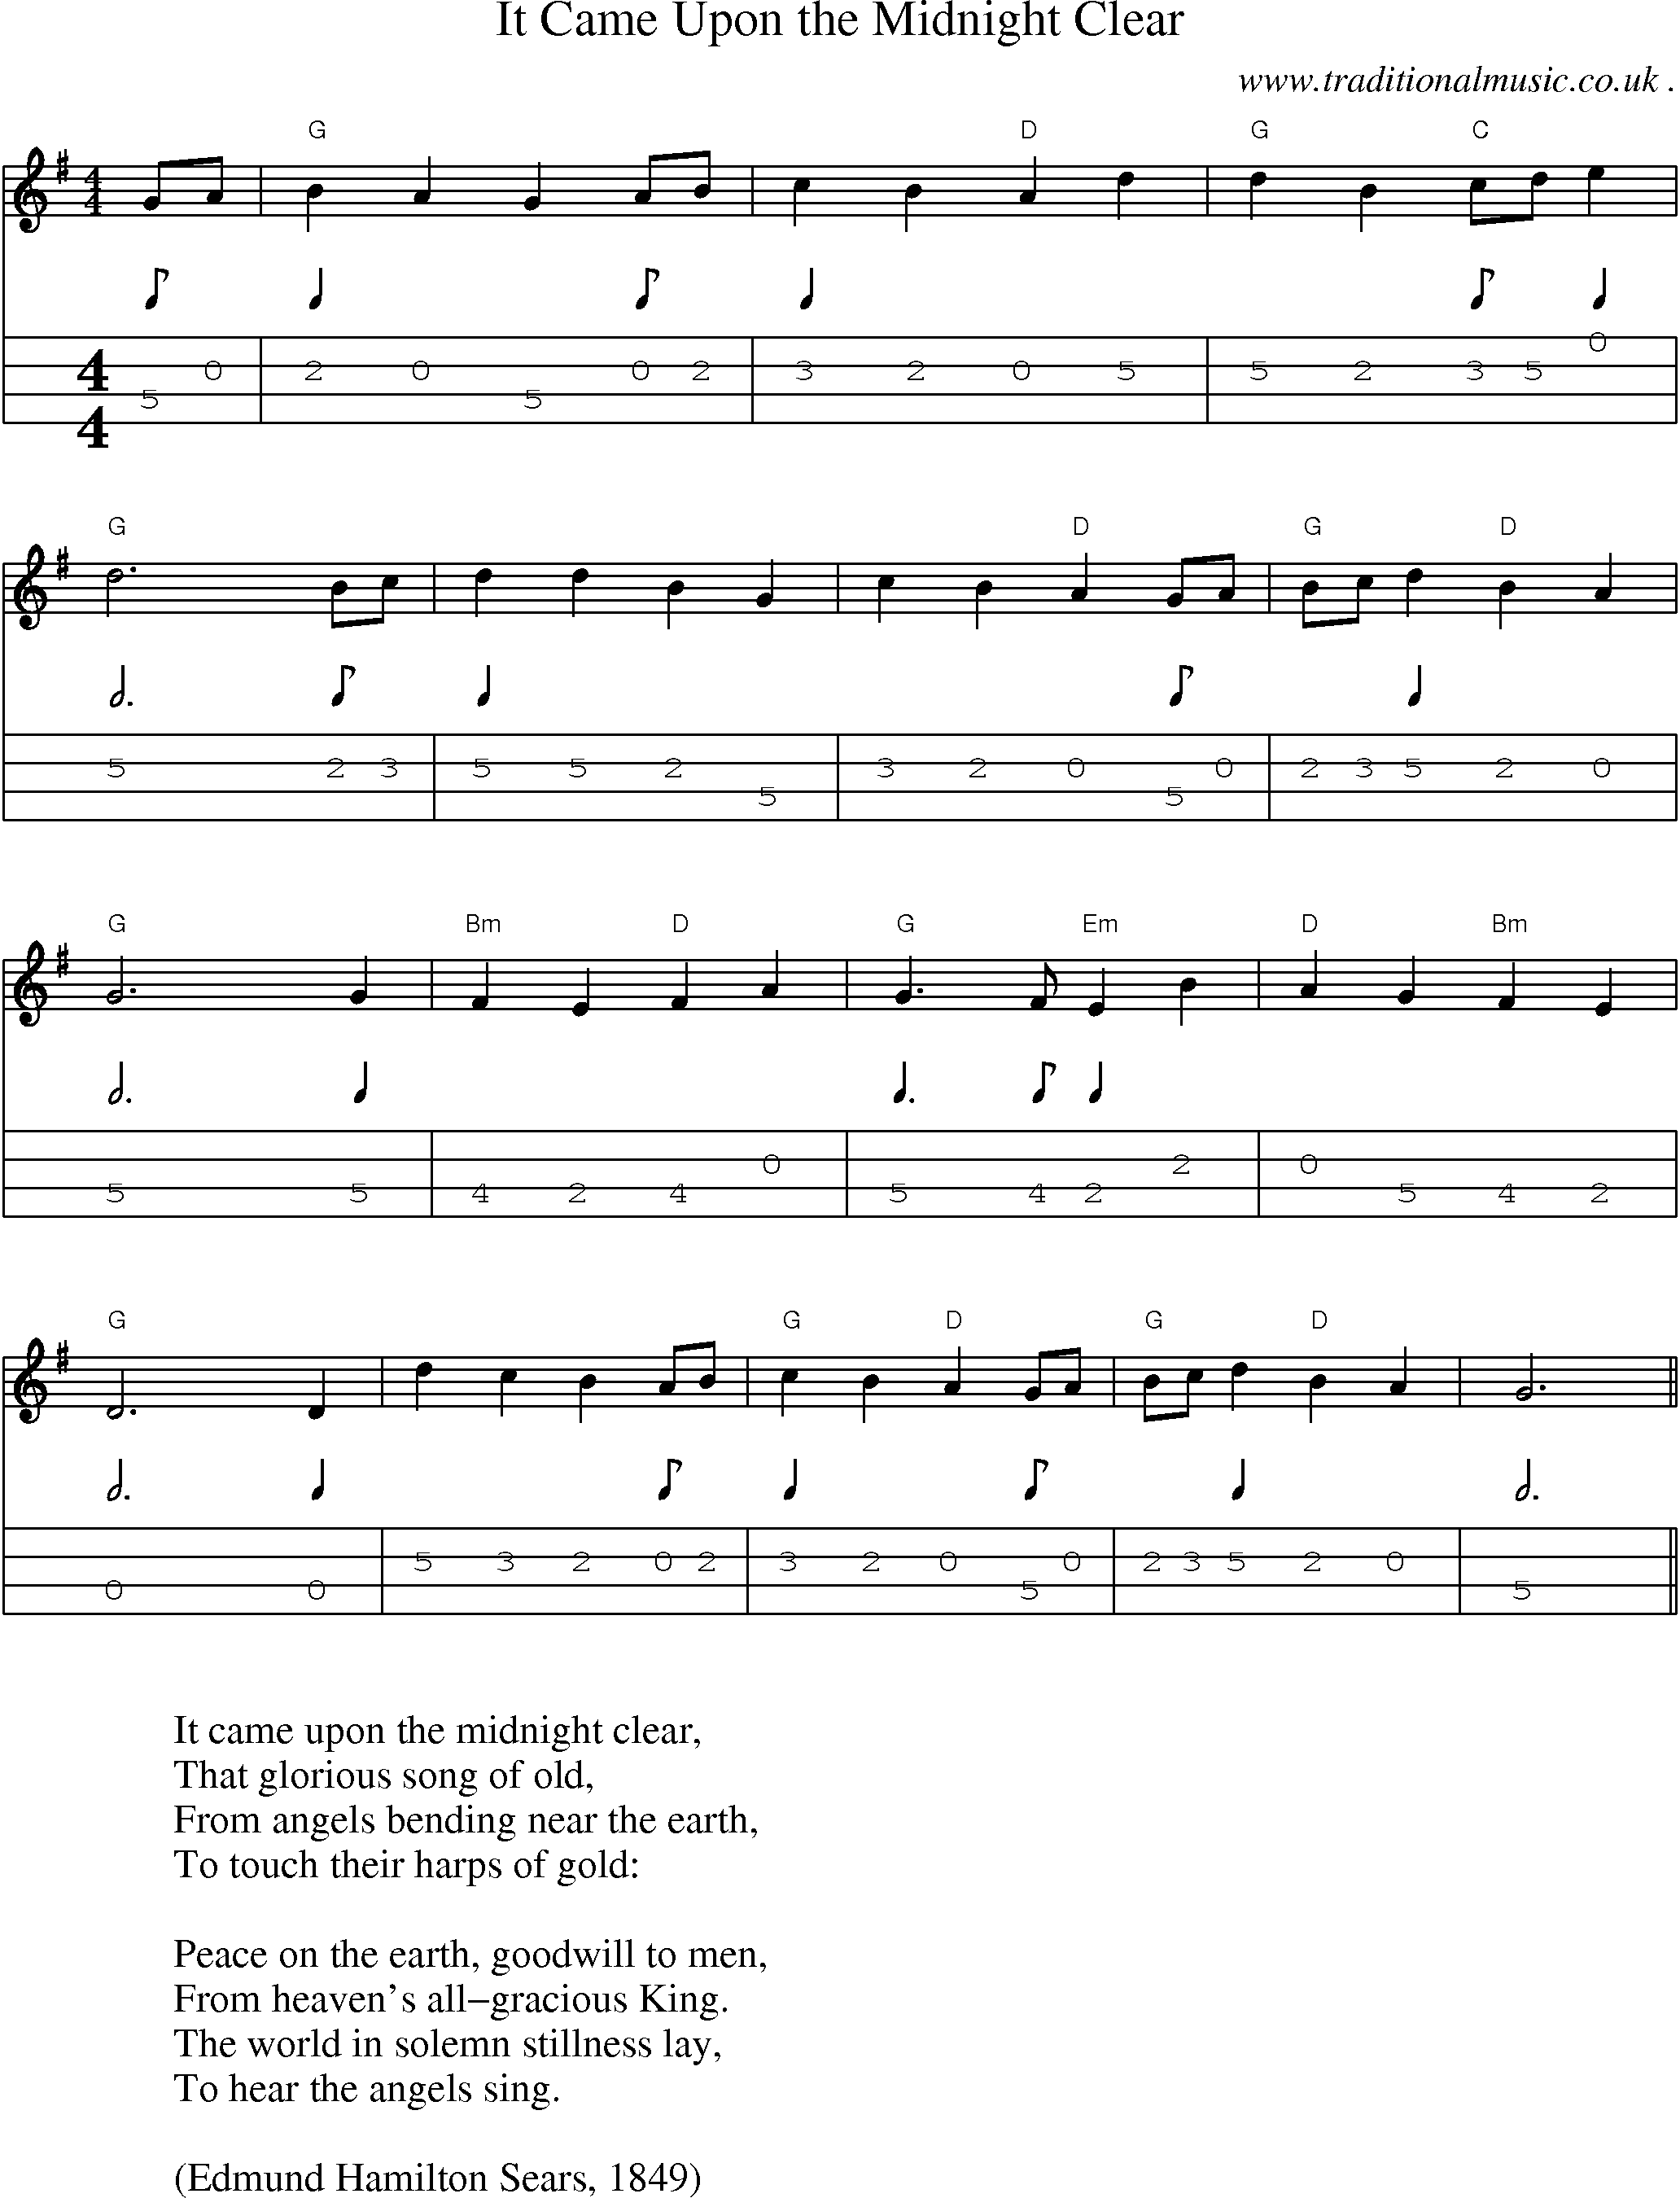 Music Score and Guitar Tabs for It Came Upon the Midnight Clear